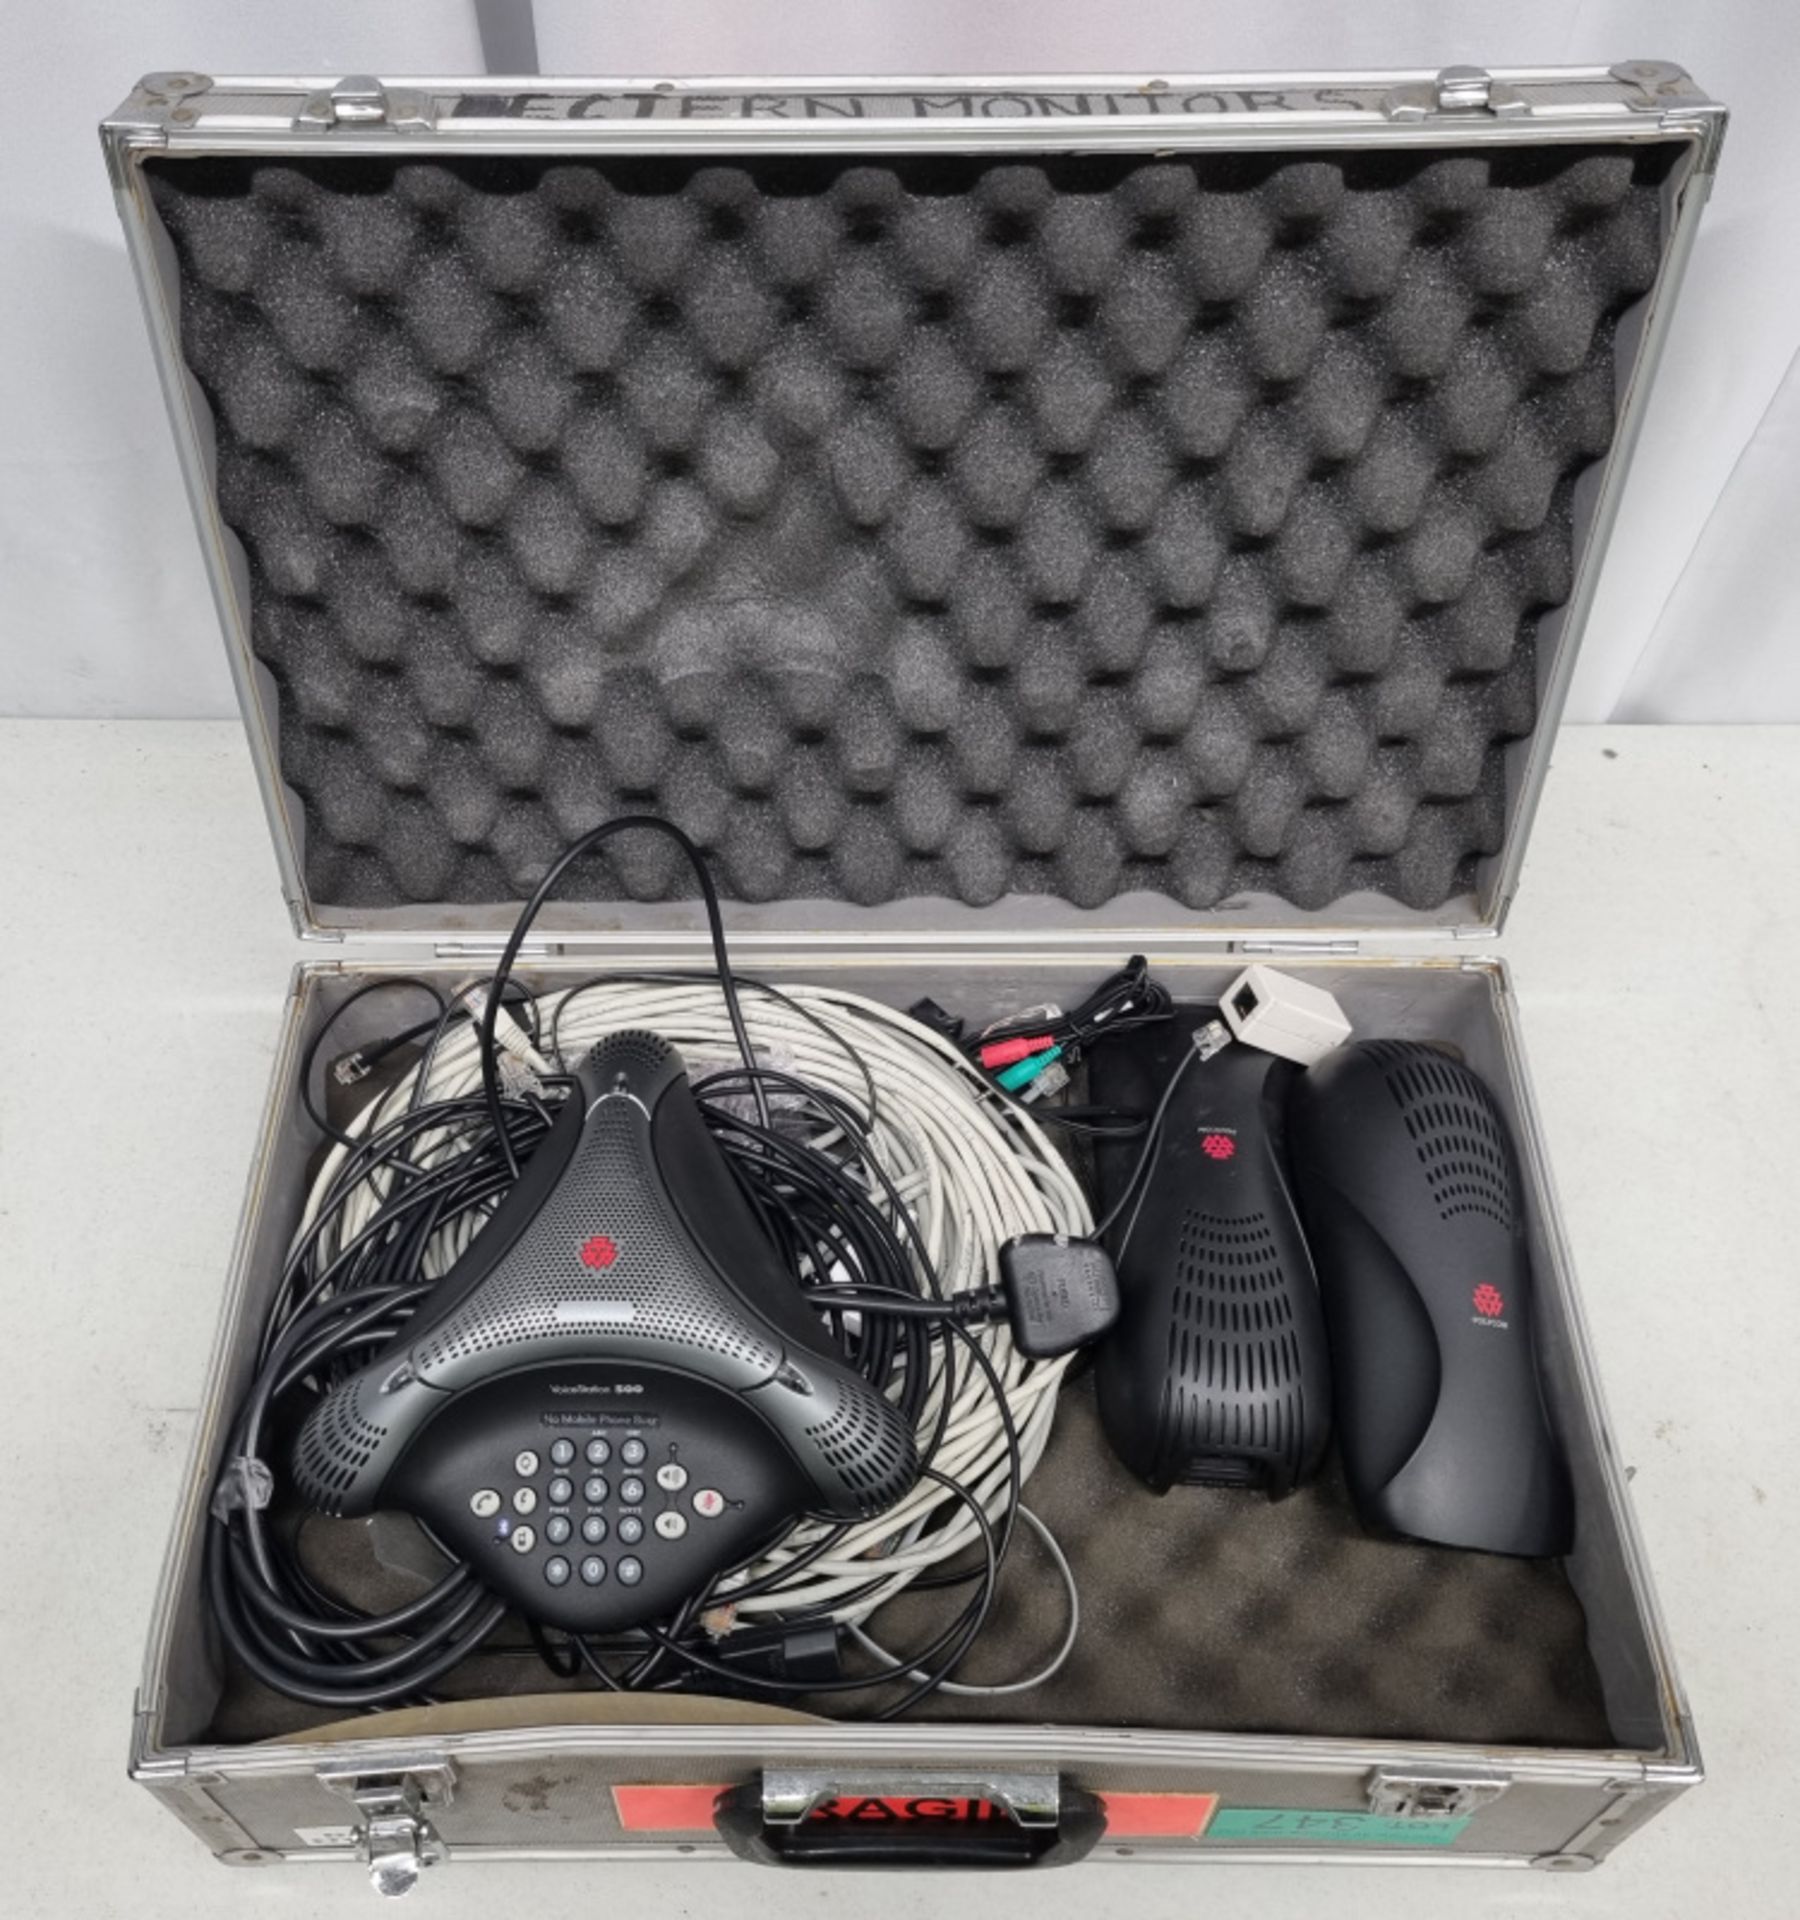 Polycom Conference Phone in flight case